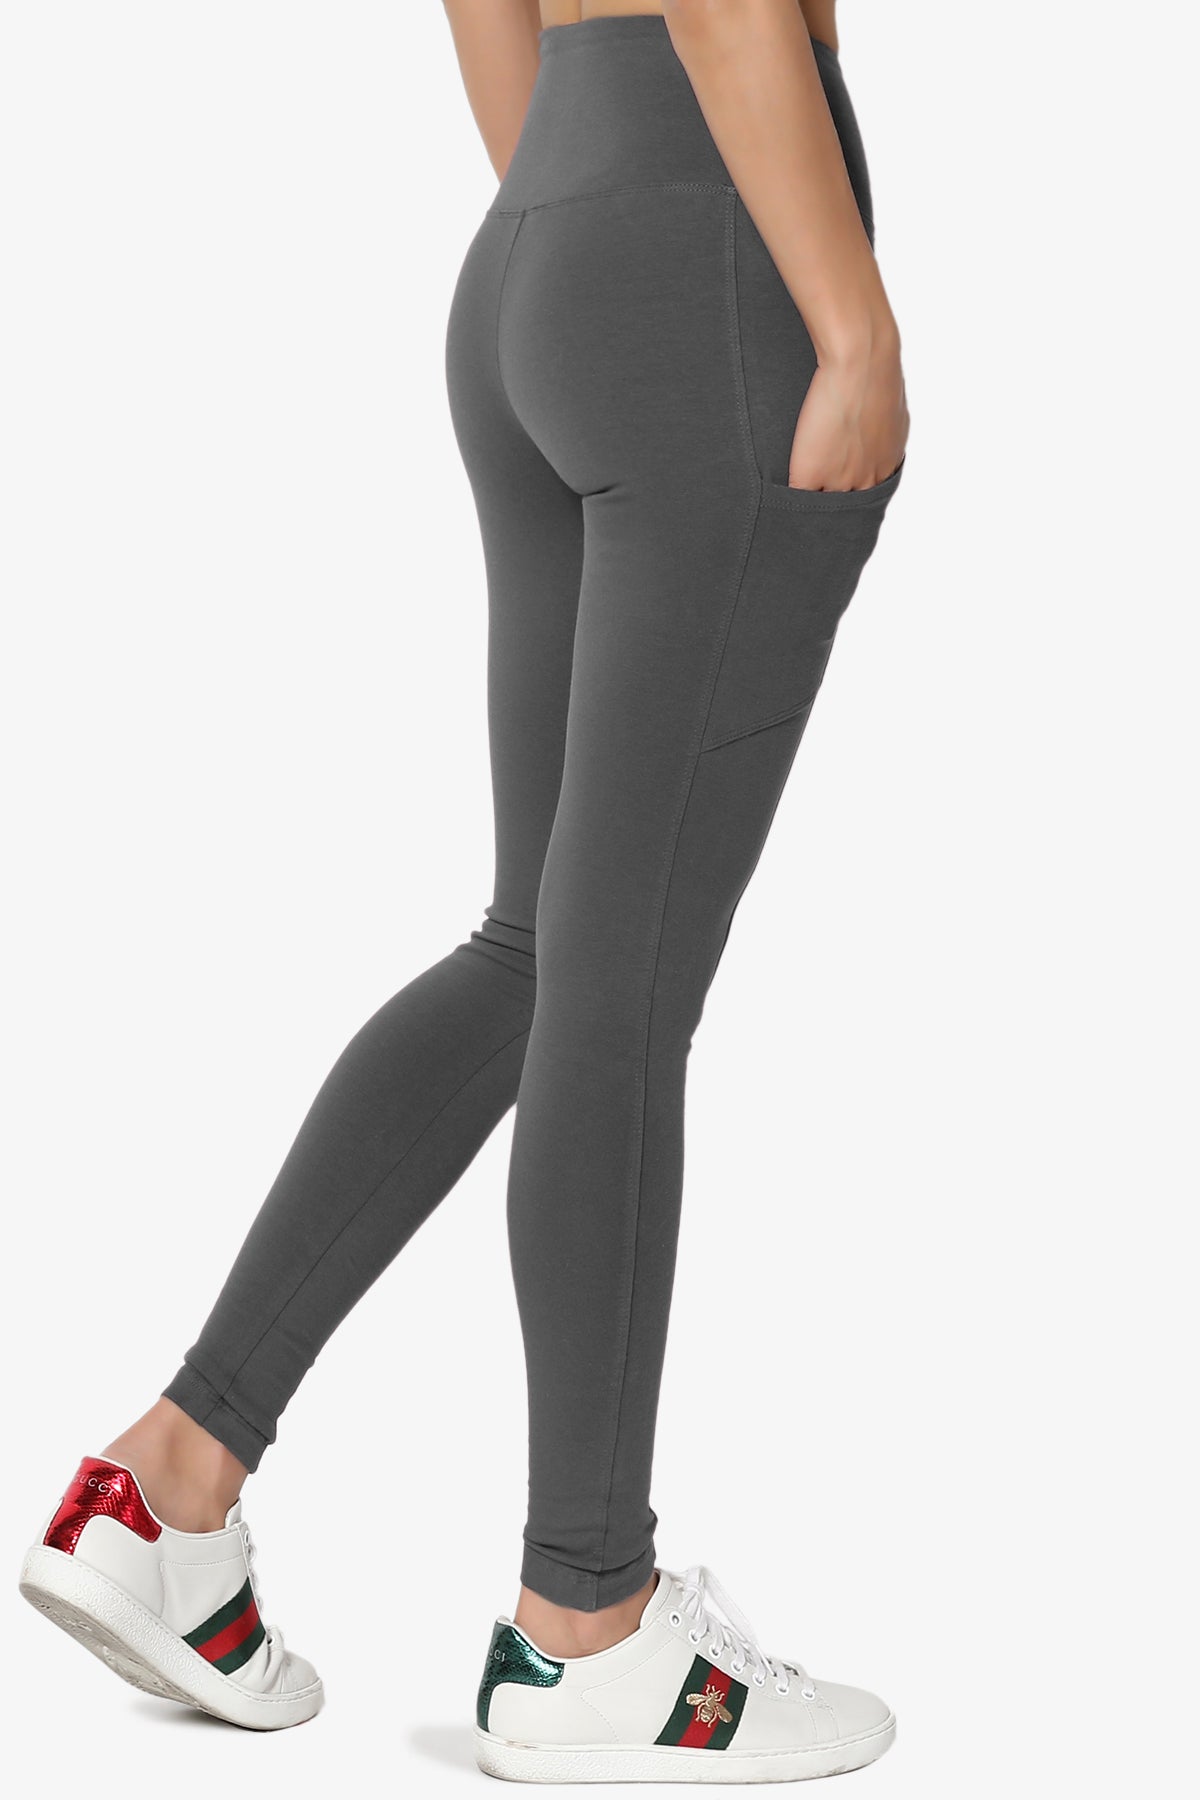 Ansley Luxe Cotton Leggings with Pockets ASH GREY_4